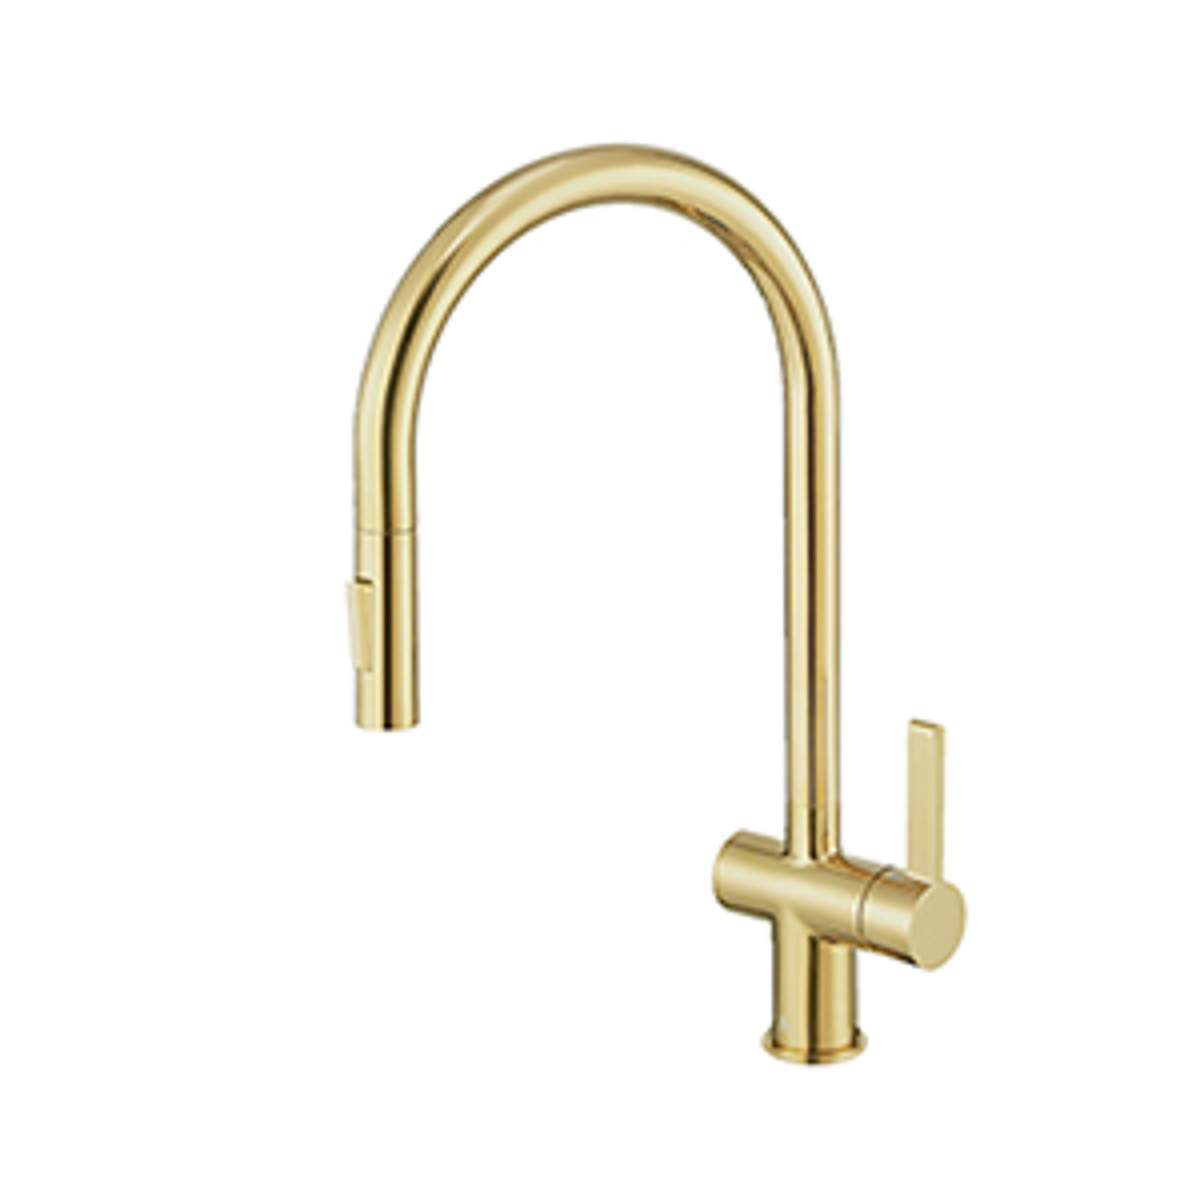 JTP Vos Brushed Brass Single Lever Pull Out Sink Mixer